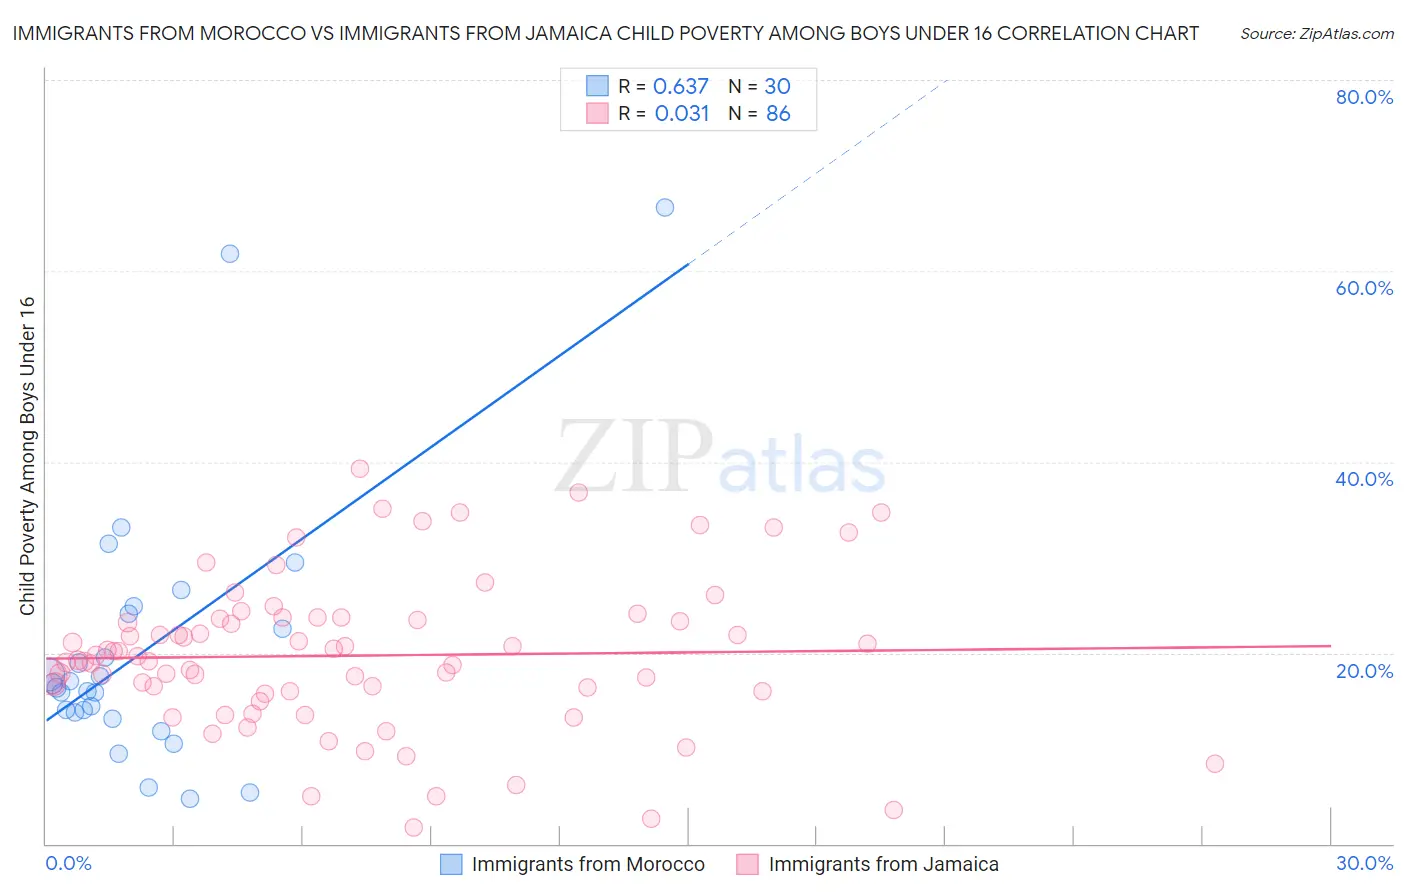 Immigrants from Morocco vs Immigrants from Jamaica Child Poverty Among Boys Under 16